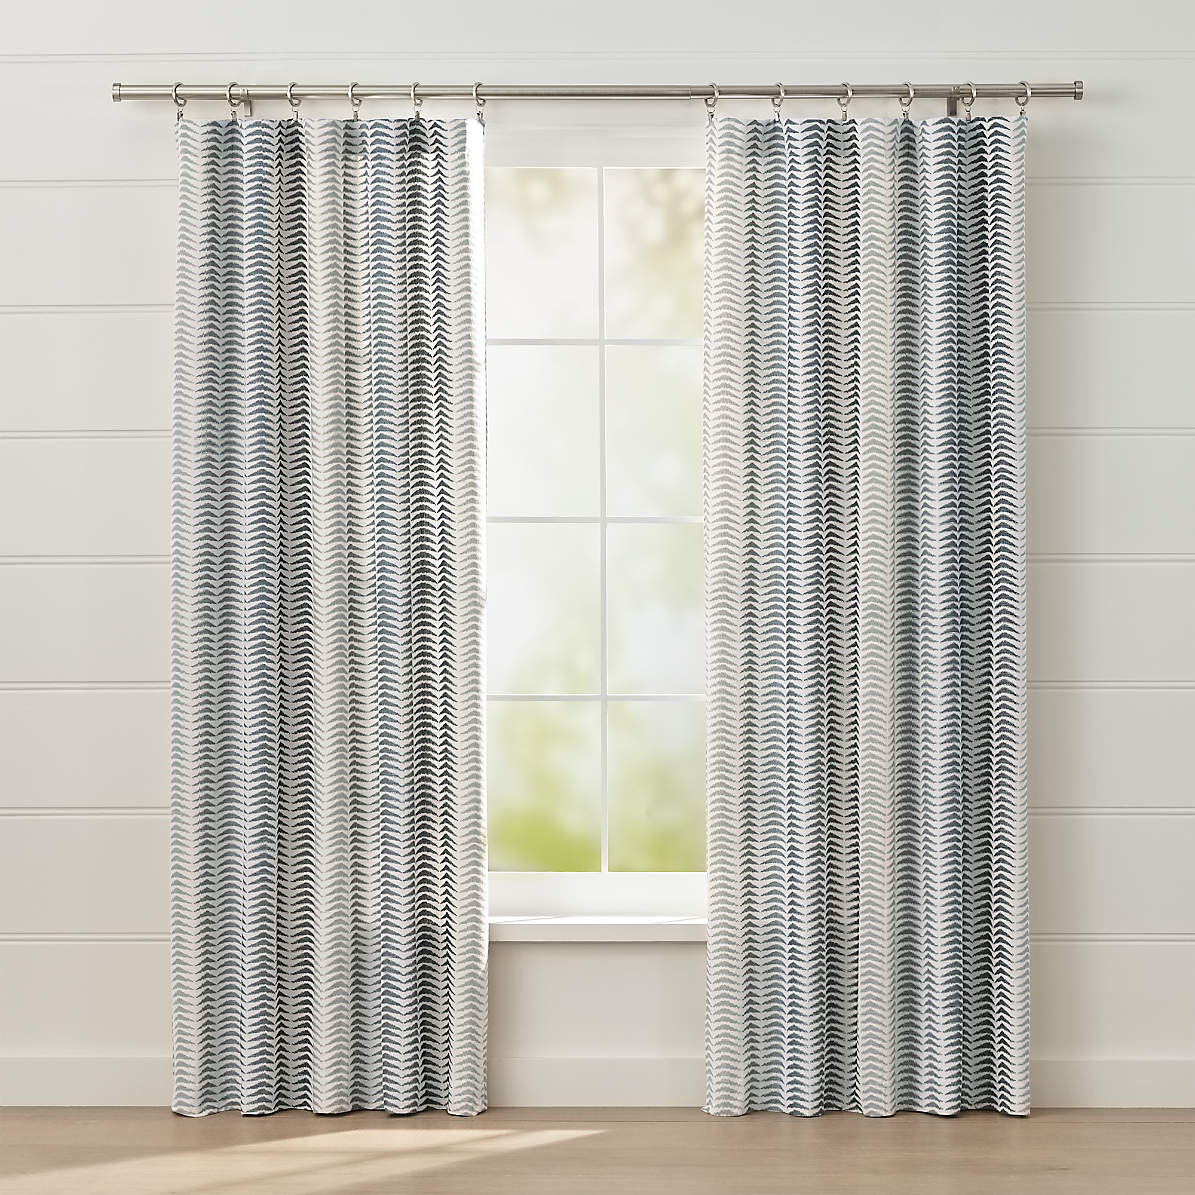 Carmelo Patterned Curtains Crate And, Gray Patterned Curtains